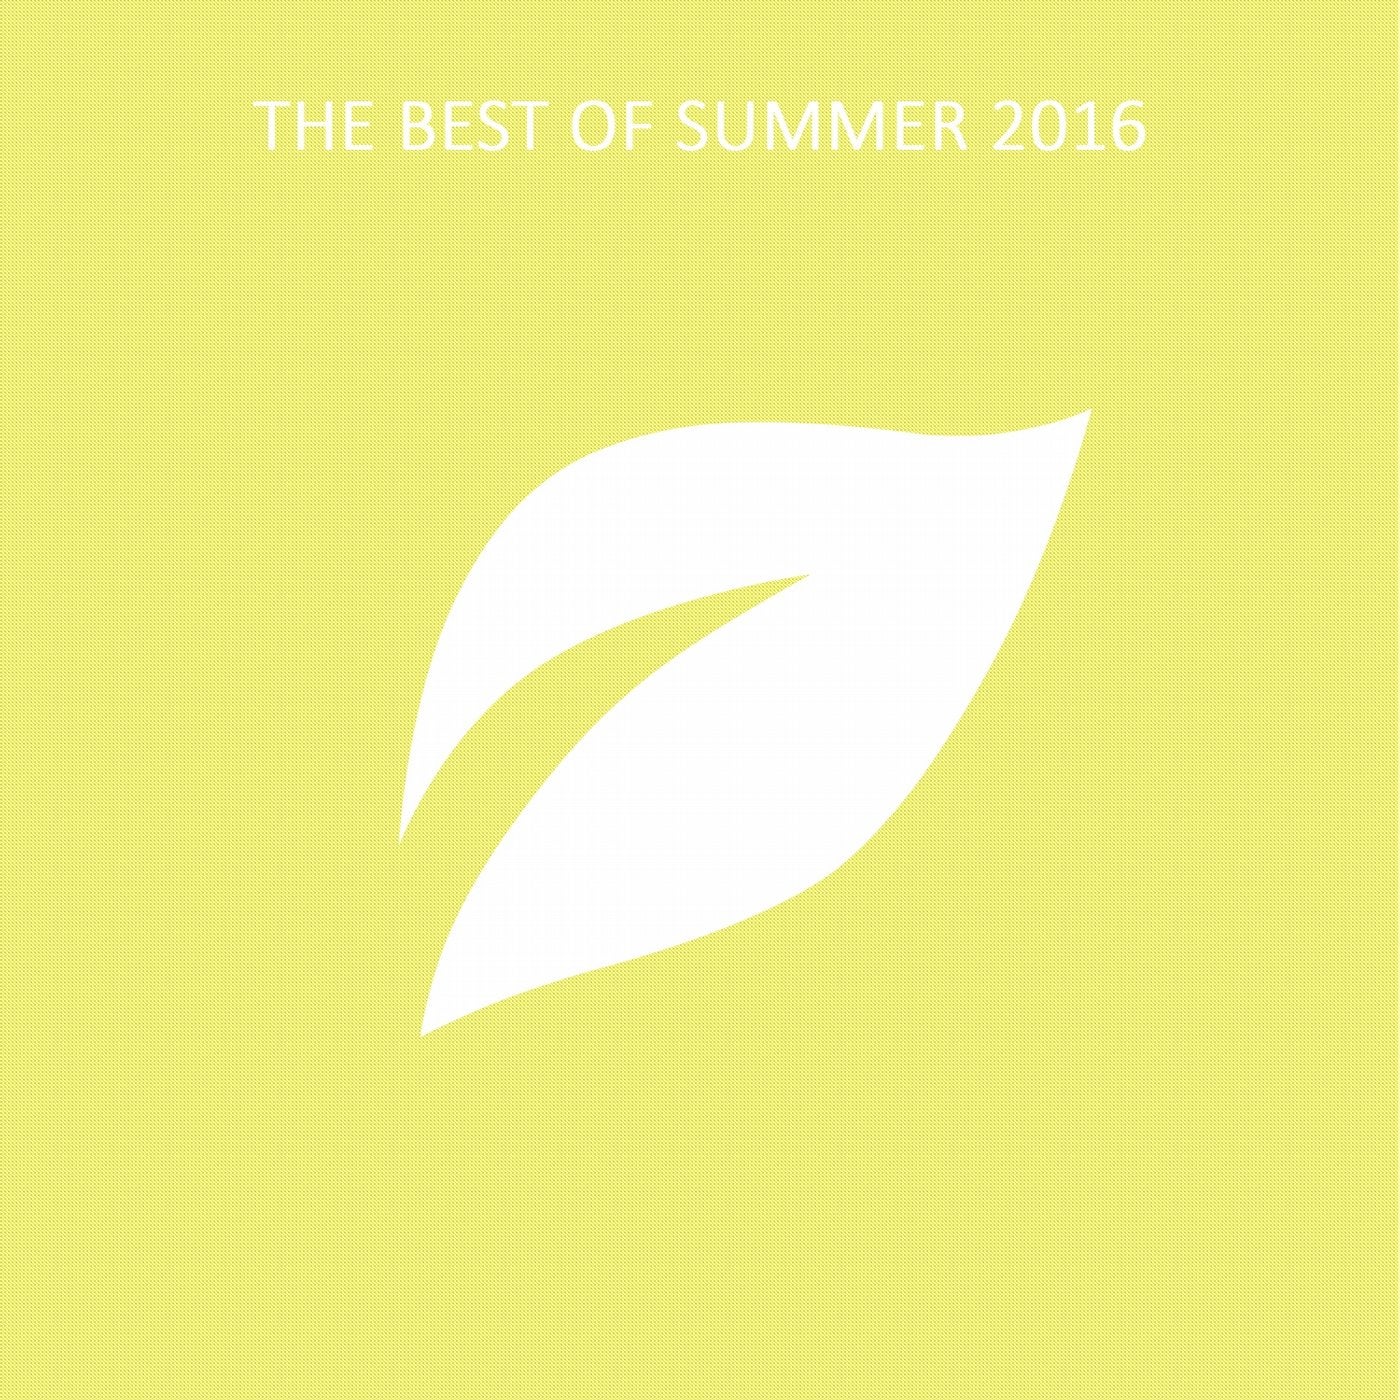 The Best of Summer 2016